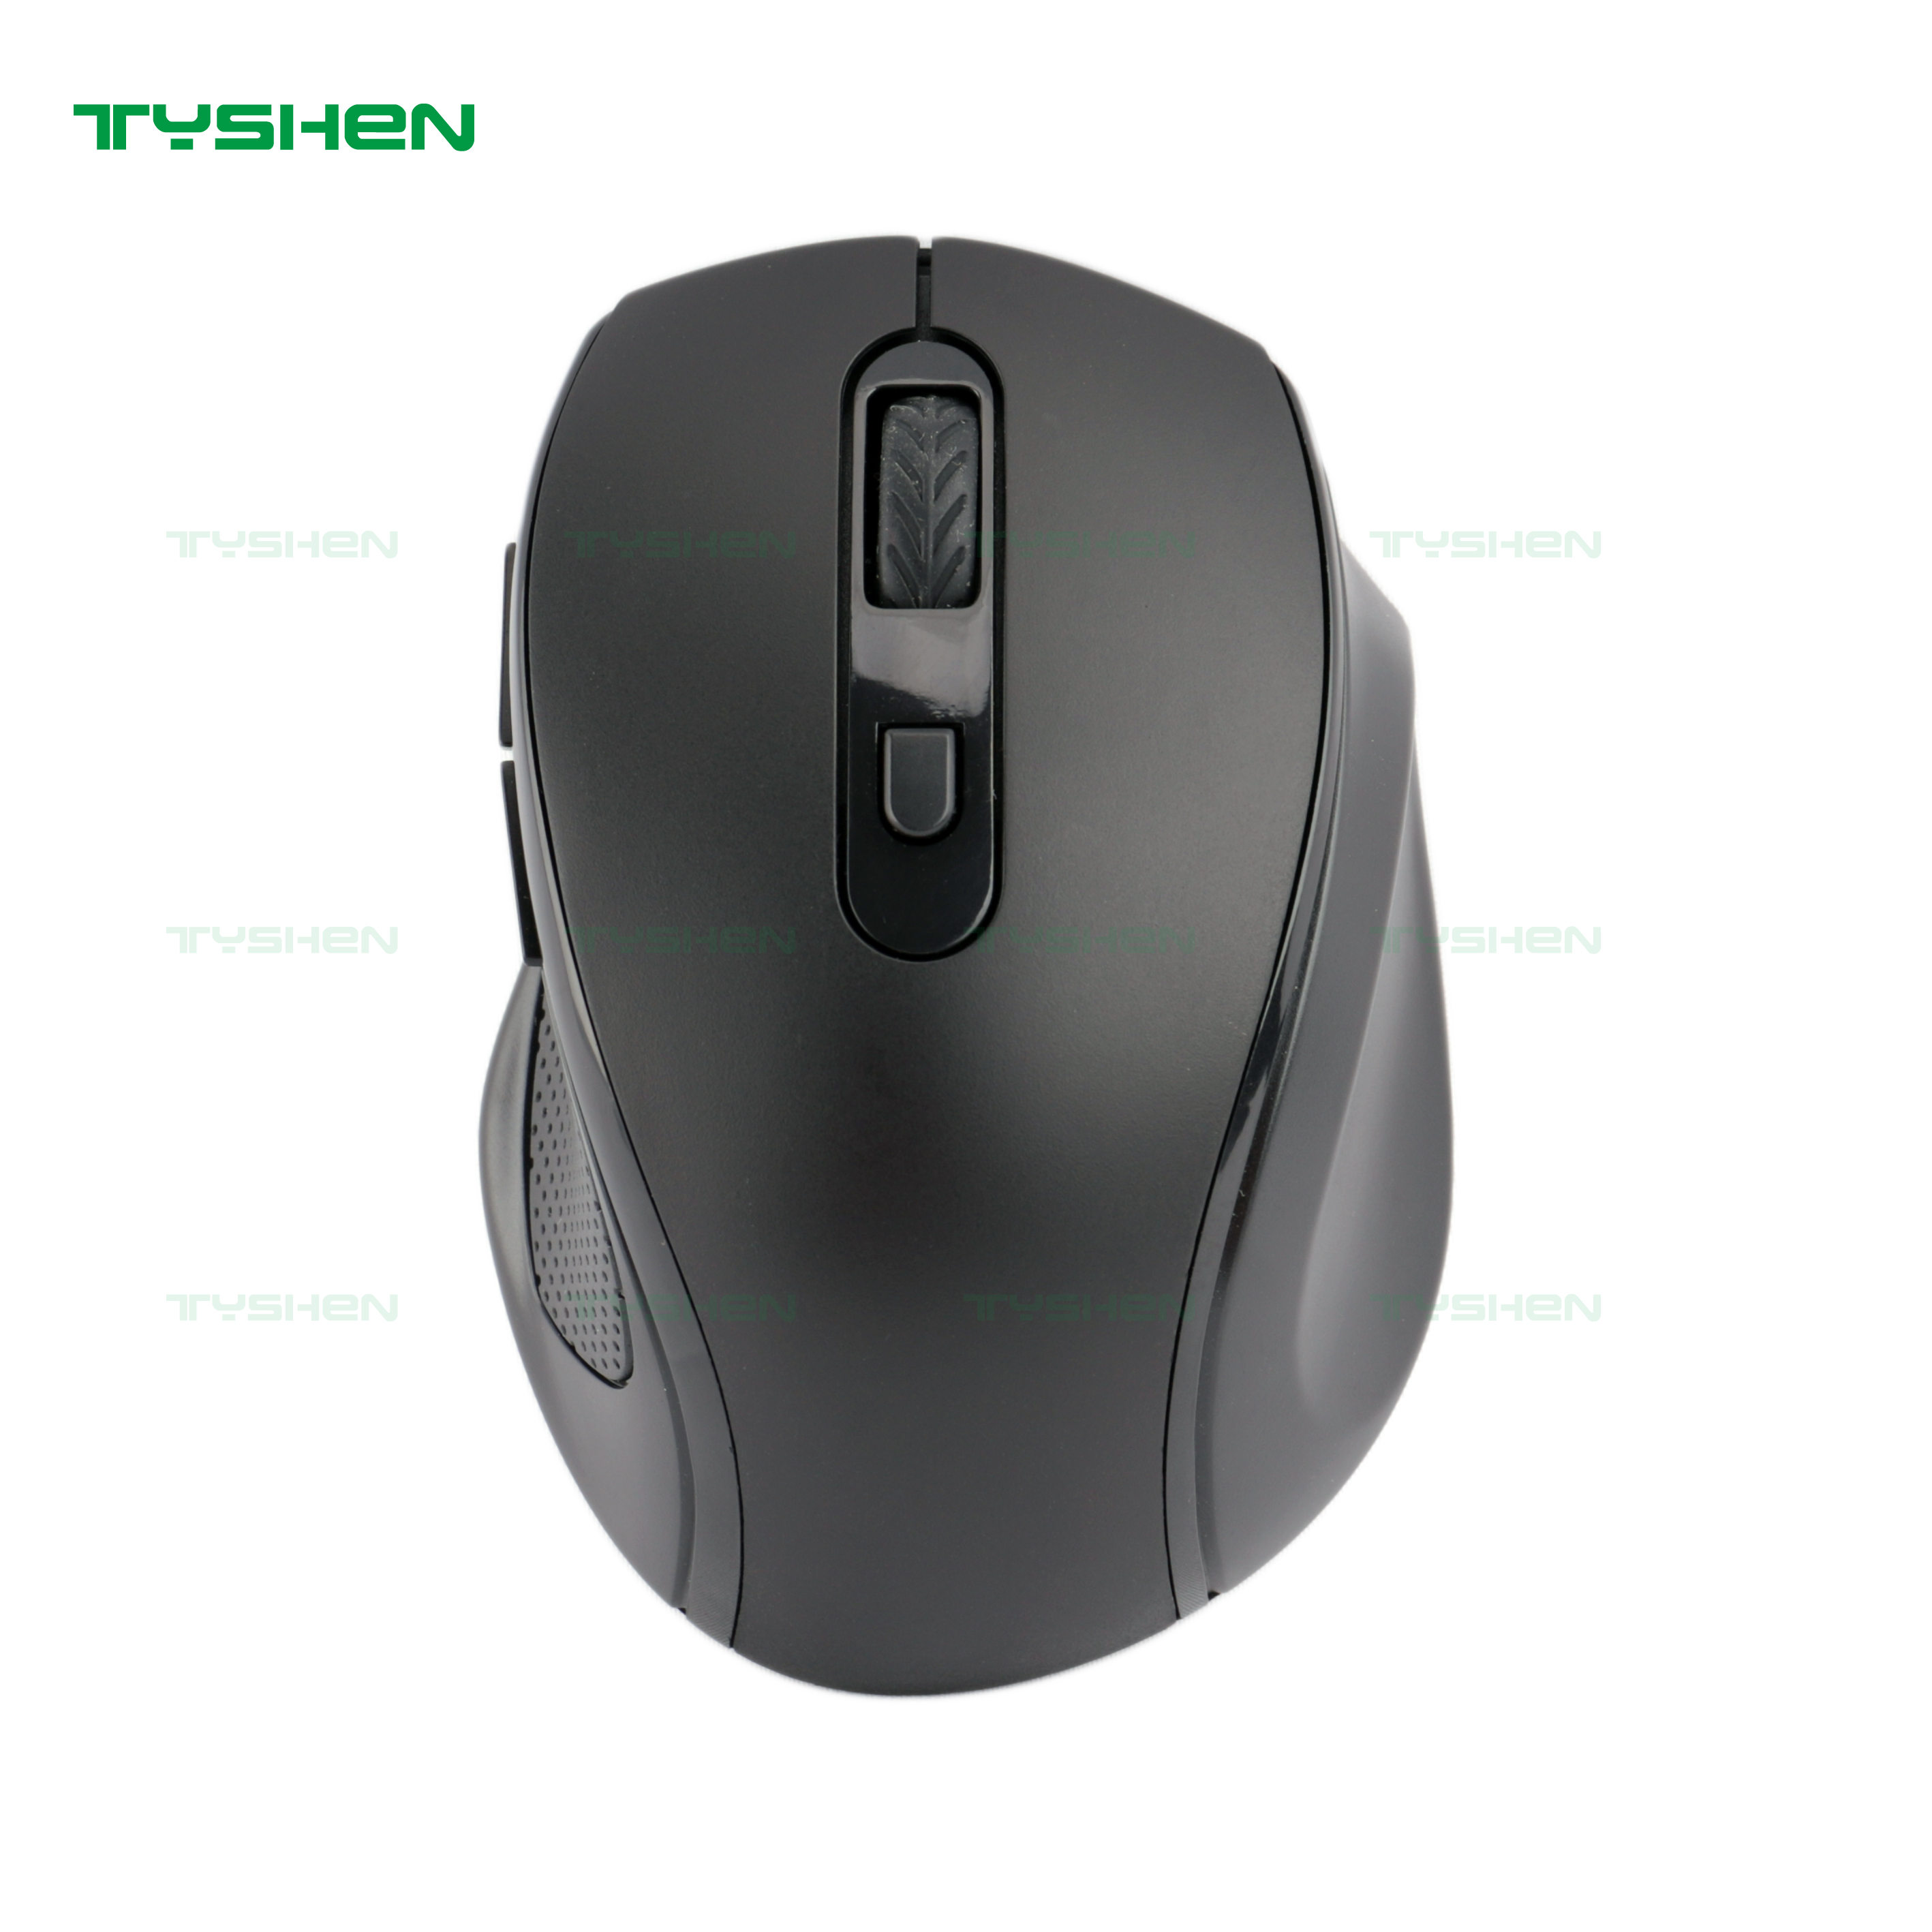 Wireless Mouse For 2021,6 Buttons,800/1200/1600 DPI,With Forward&Backward Key,In Stock,Drop Shipping Available